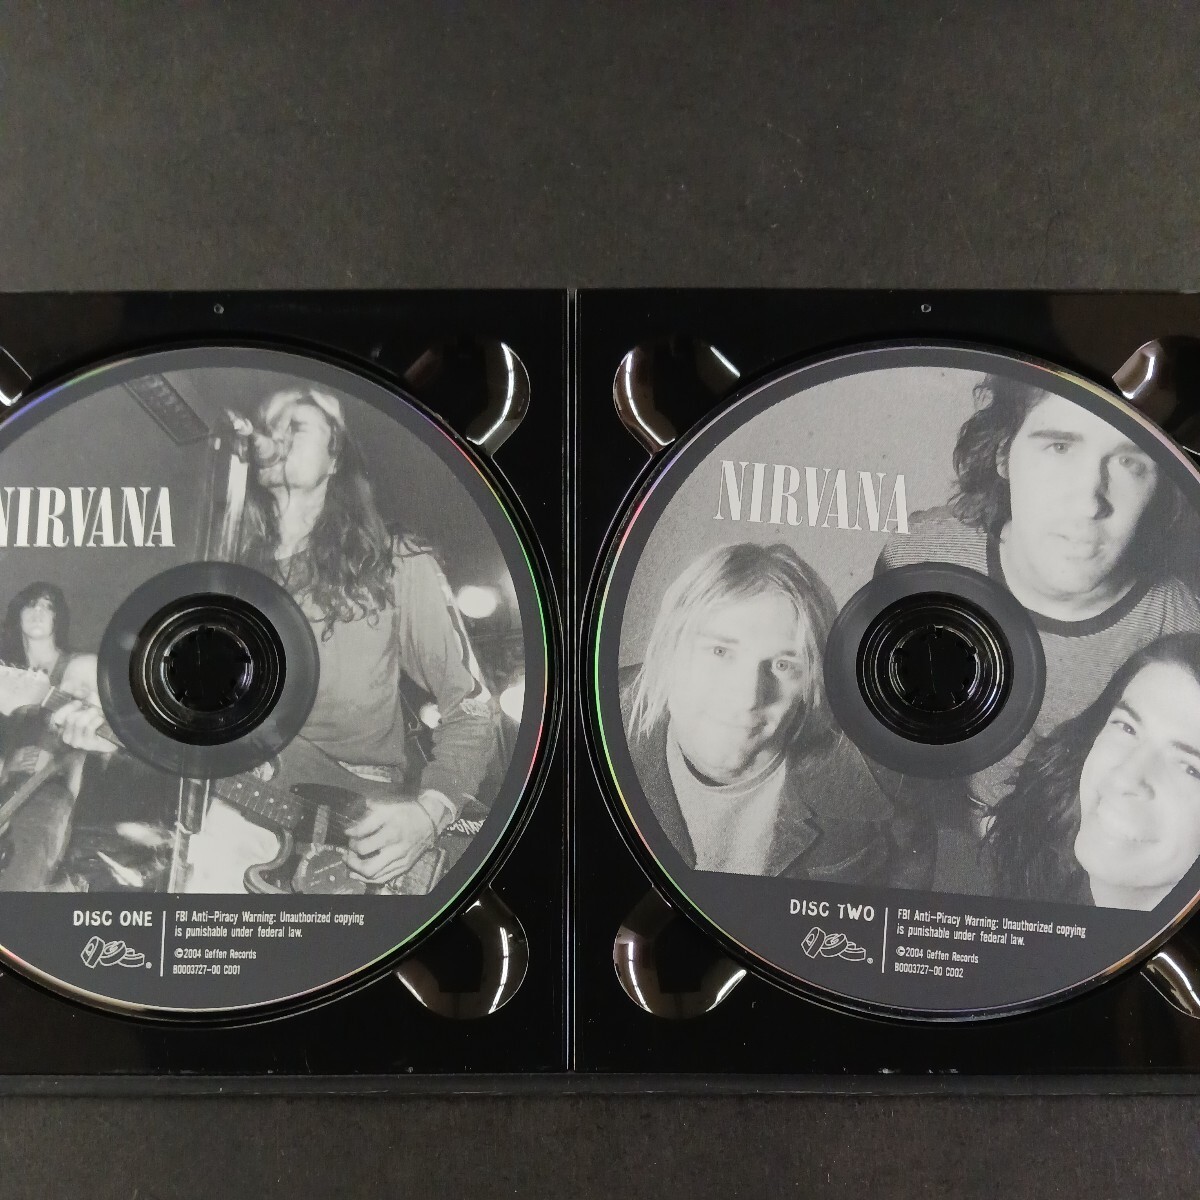 CD_25】 ニルヴァーナ Nirvana／ With the Lights Out (3CD+1DVD) [digi-pack]_画像3